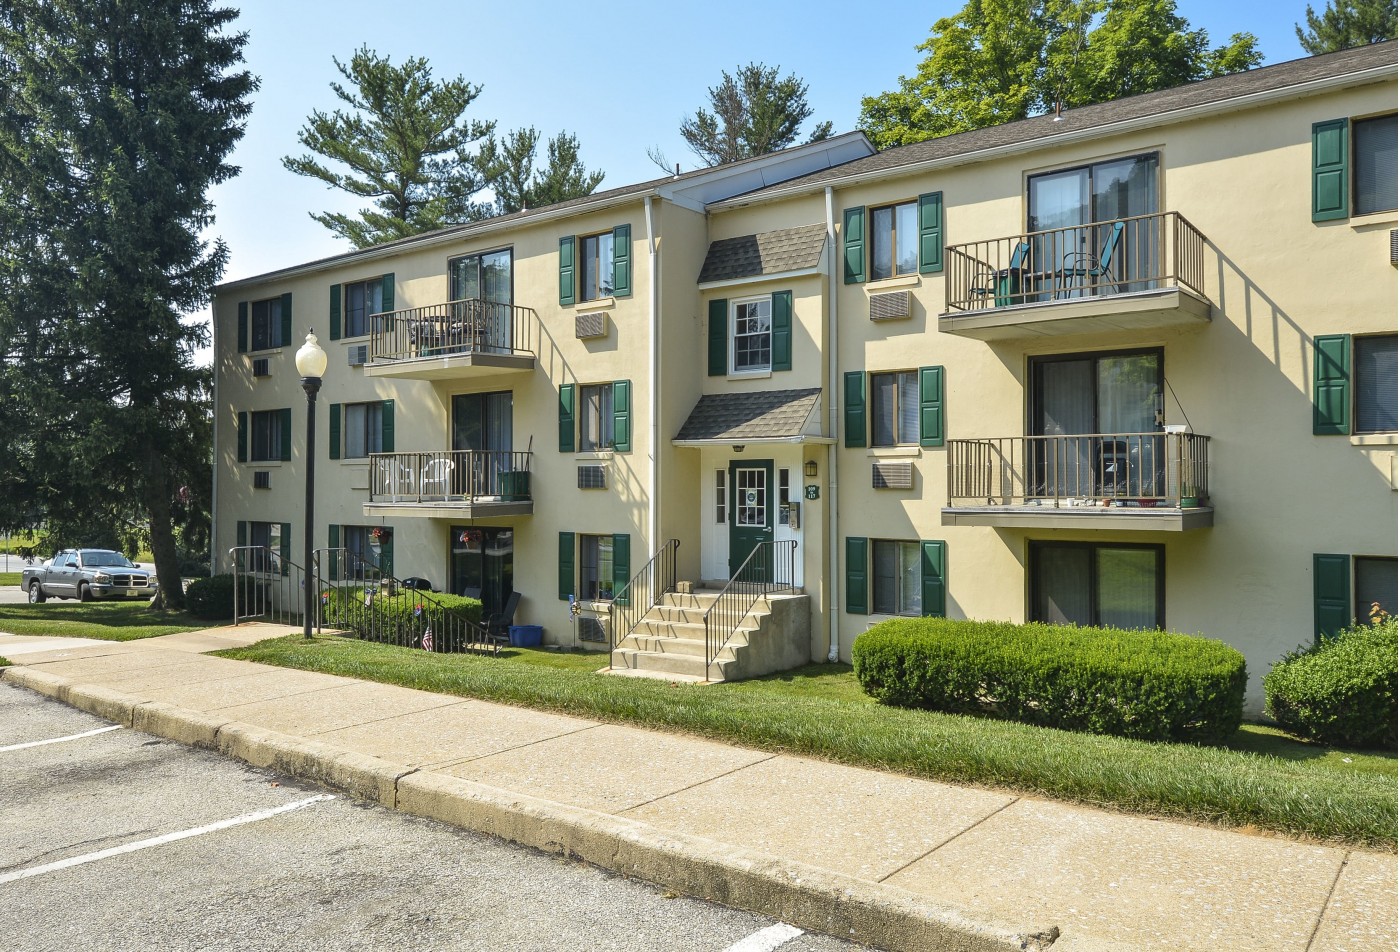 Swimming Pool | Apartment Homes in Downingtown, PA | Norwood House Apartments